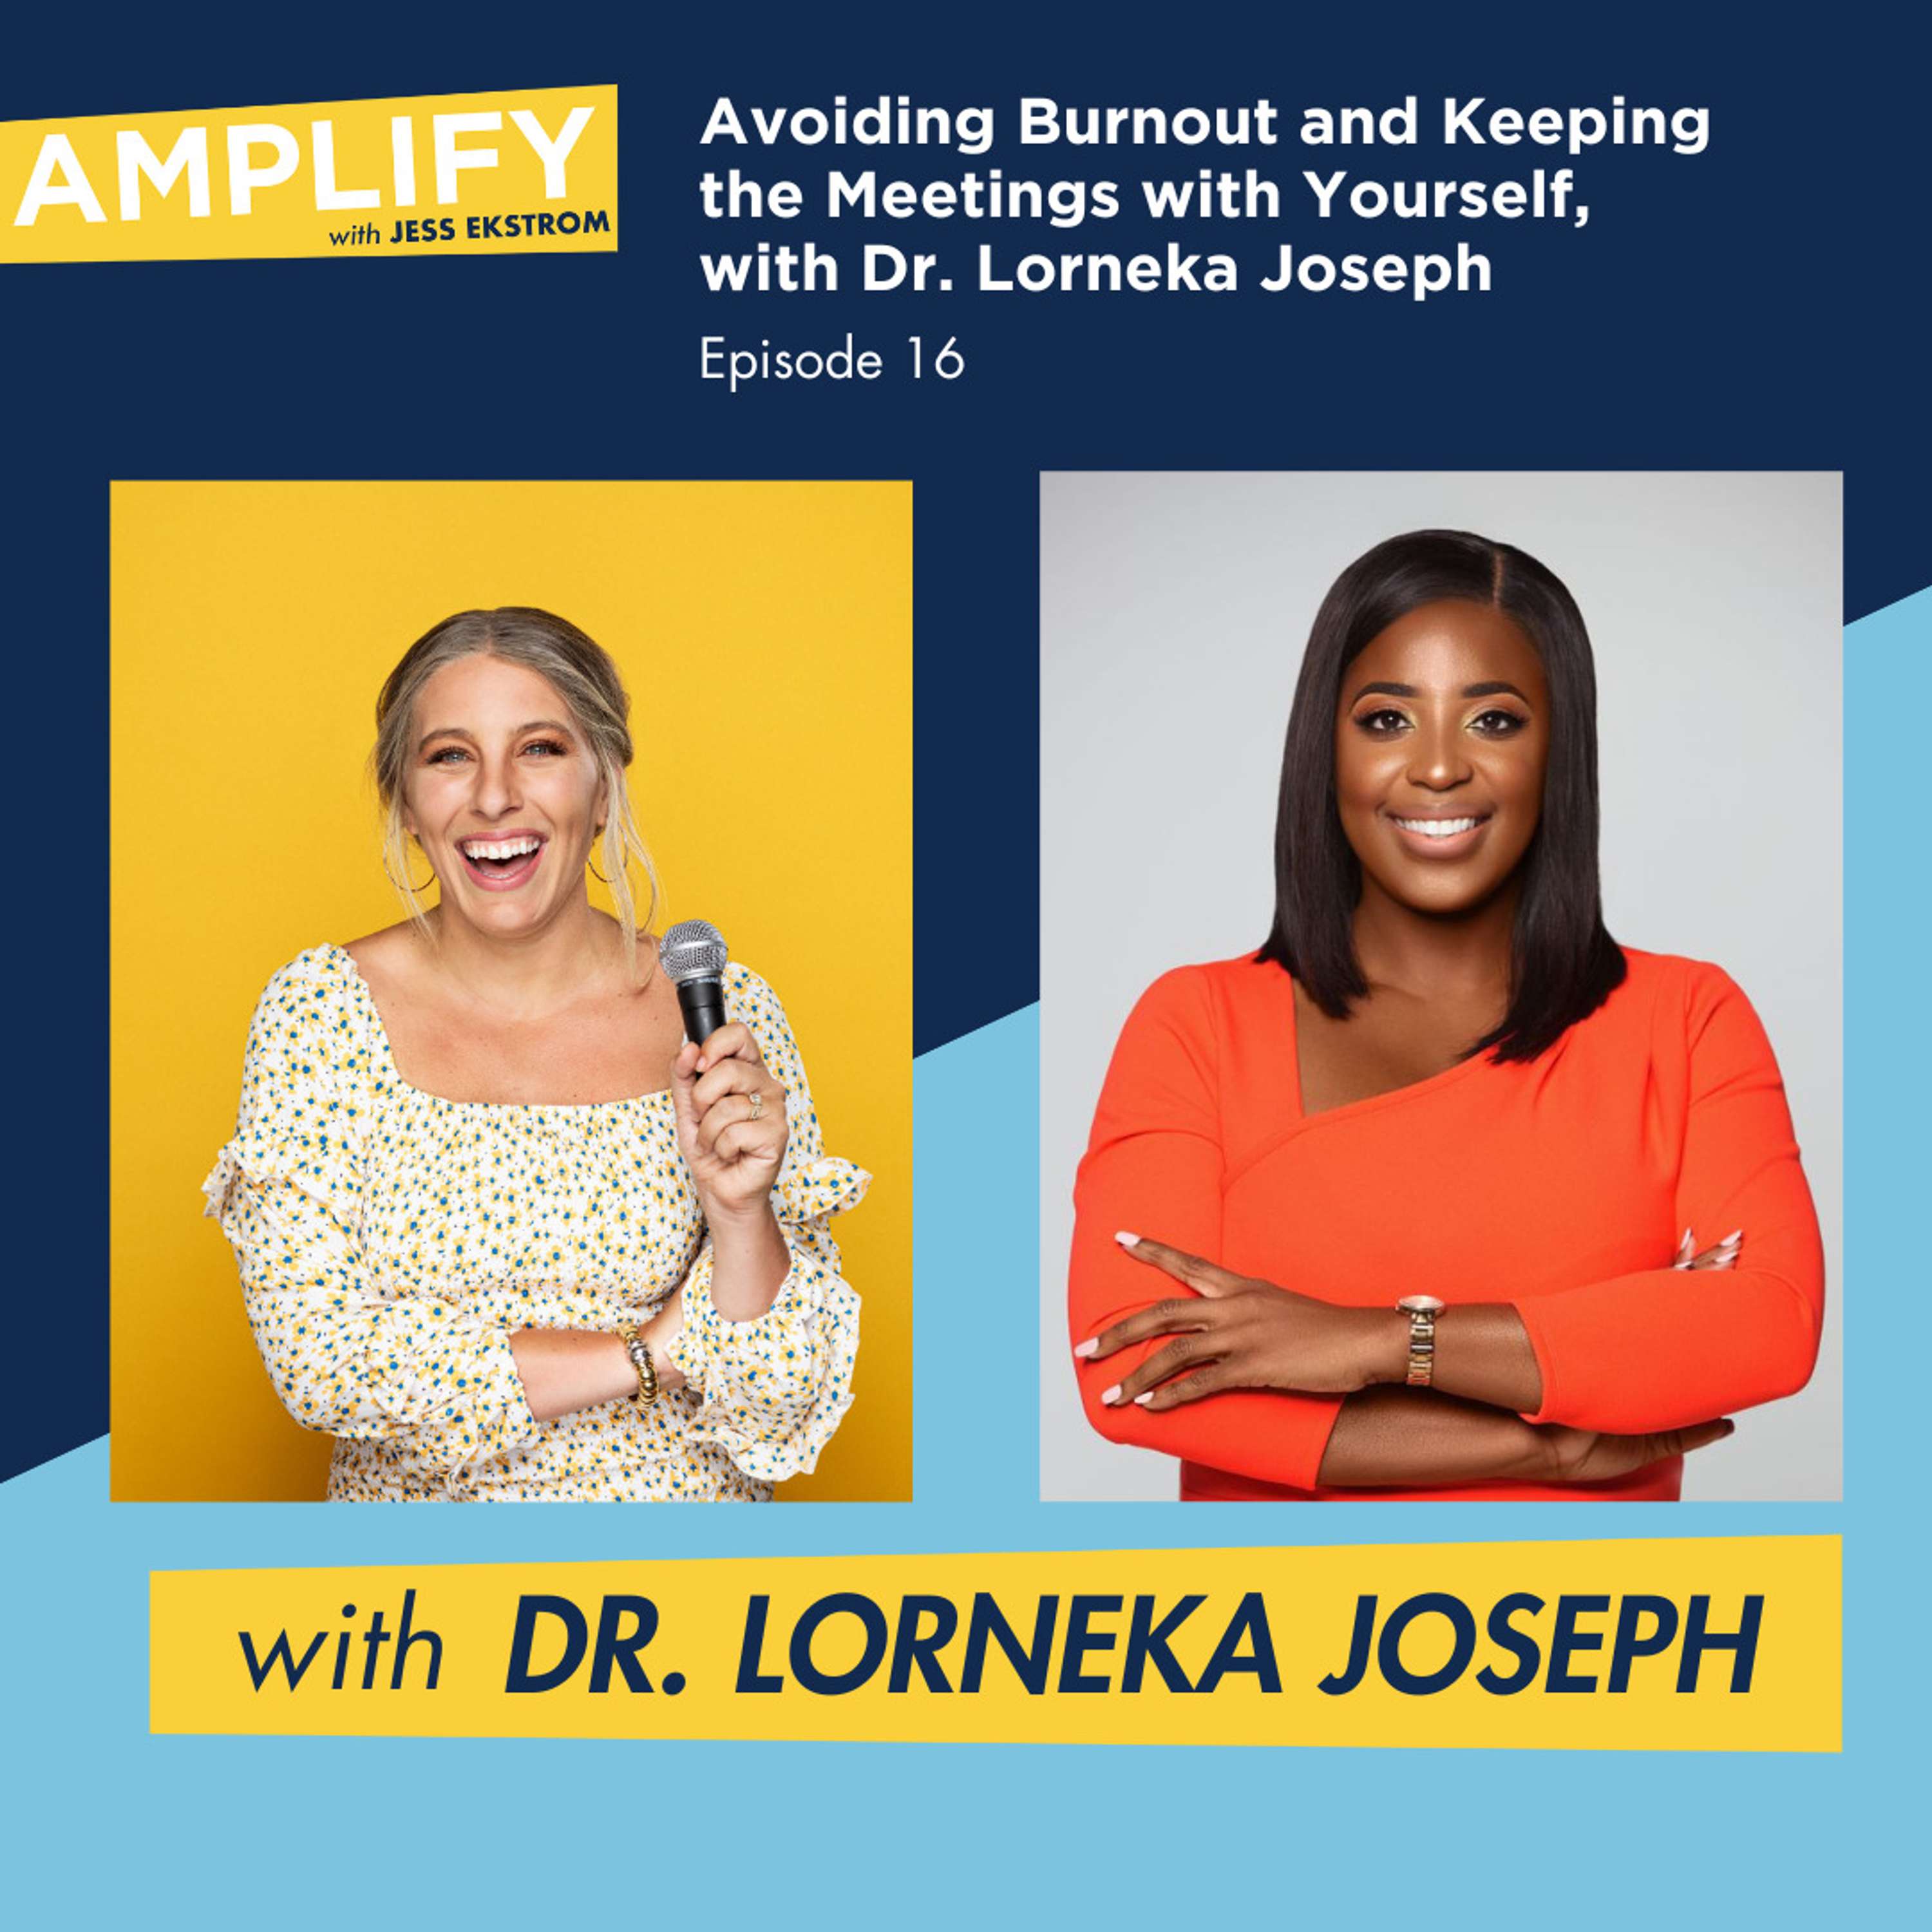 16. Avoiding Burnout and Keeping the Meetings with Yourself, with Dr. Lorneka Joseph